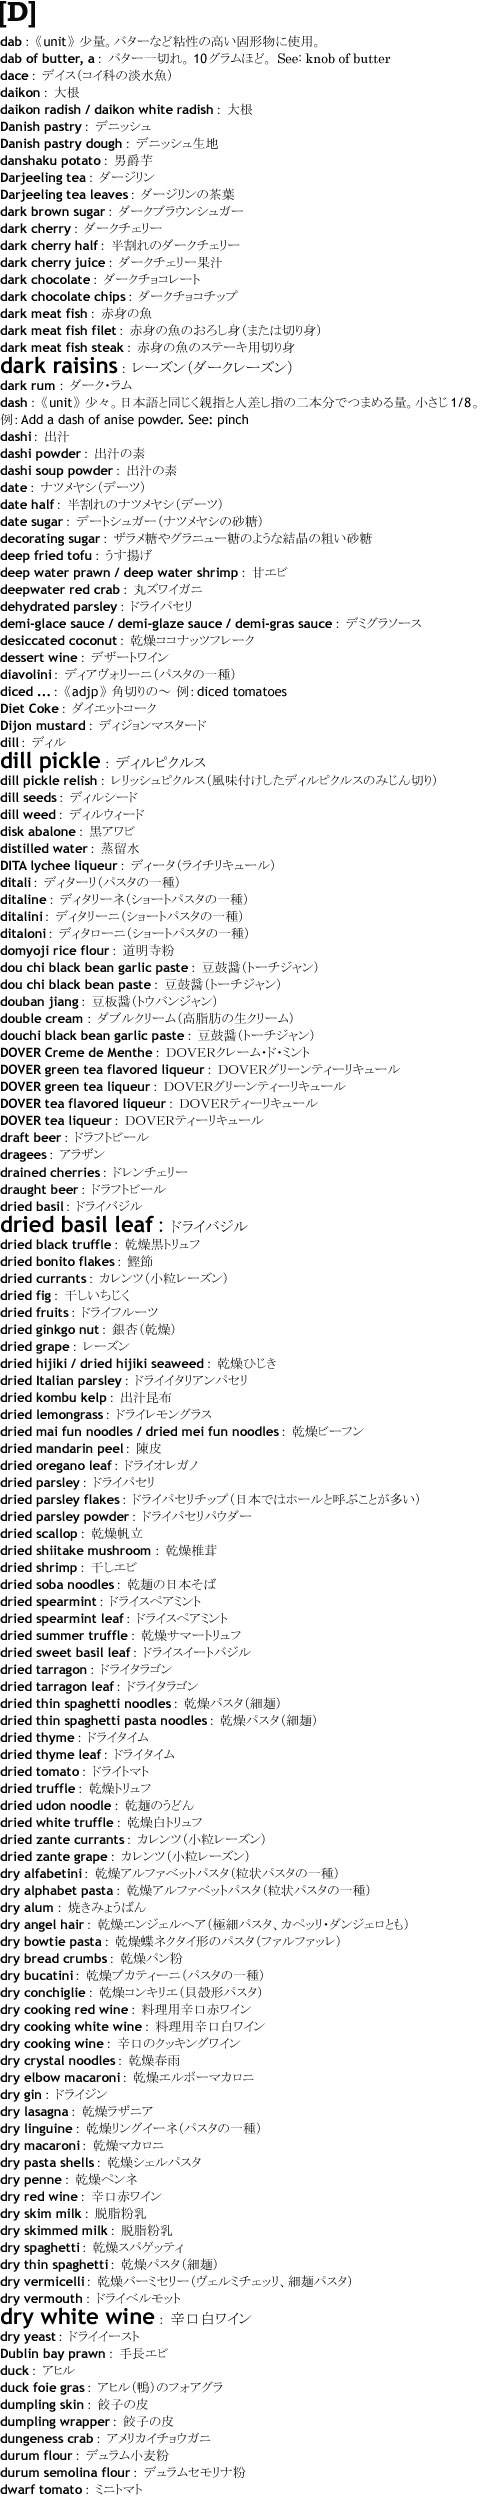 English Japanese Food Dictionary from dab to dwarf tomato